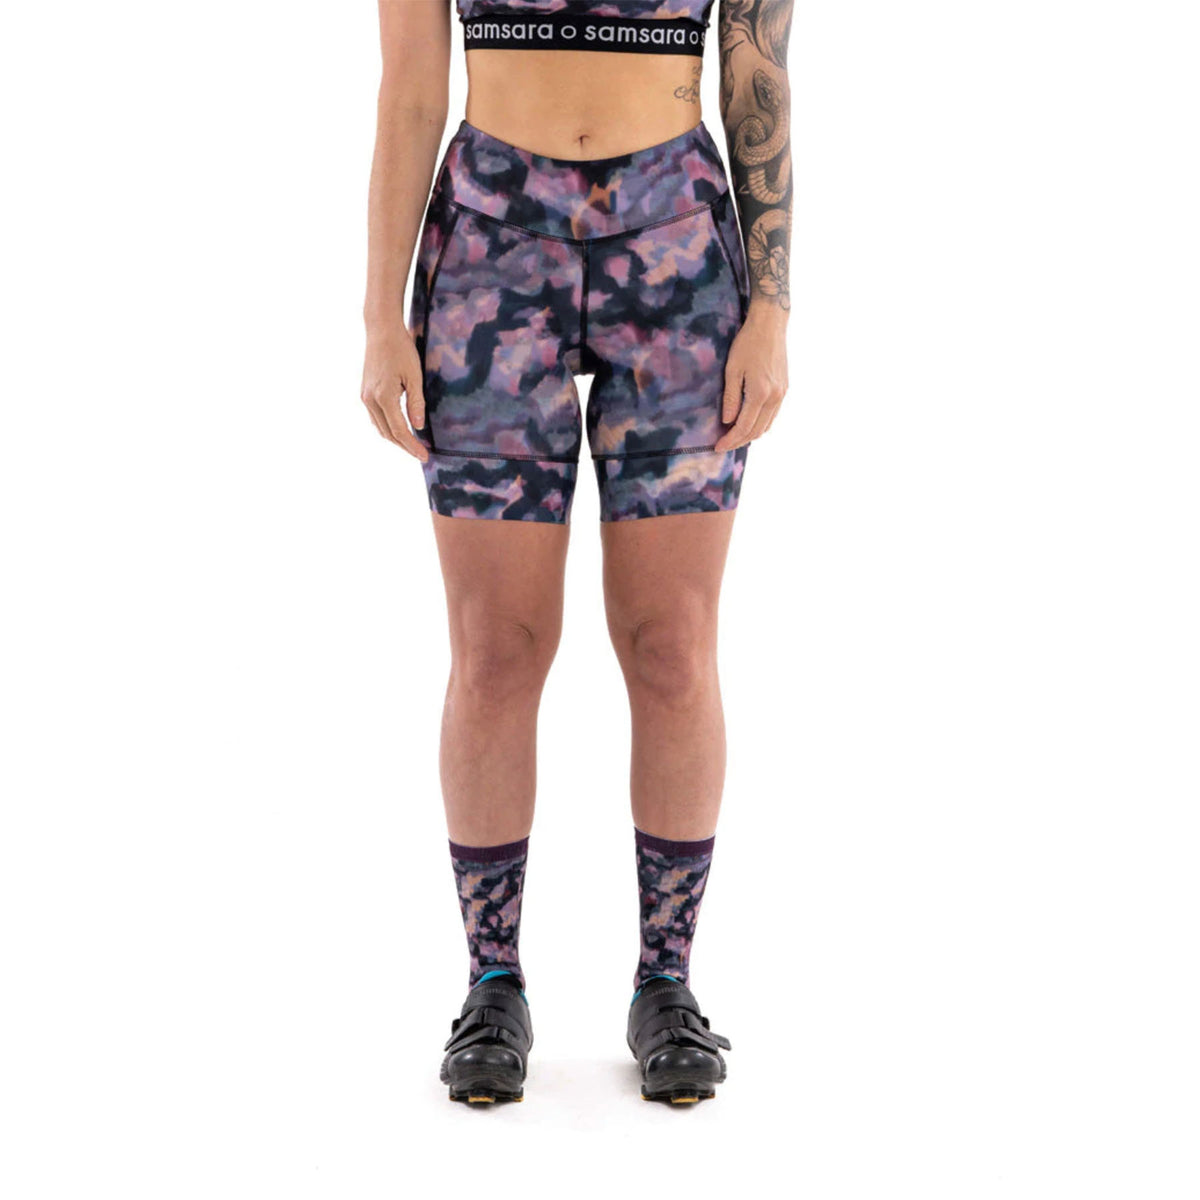 Hero image featuring the front of the Samsara performance 7" cycling shorts in a dark watercolor camo 